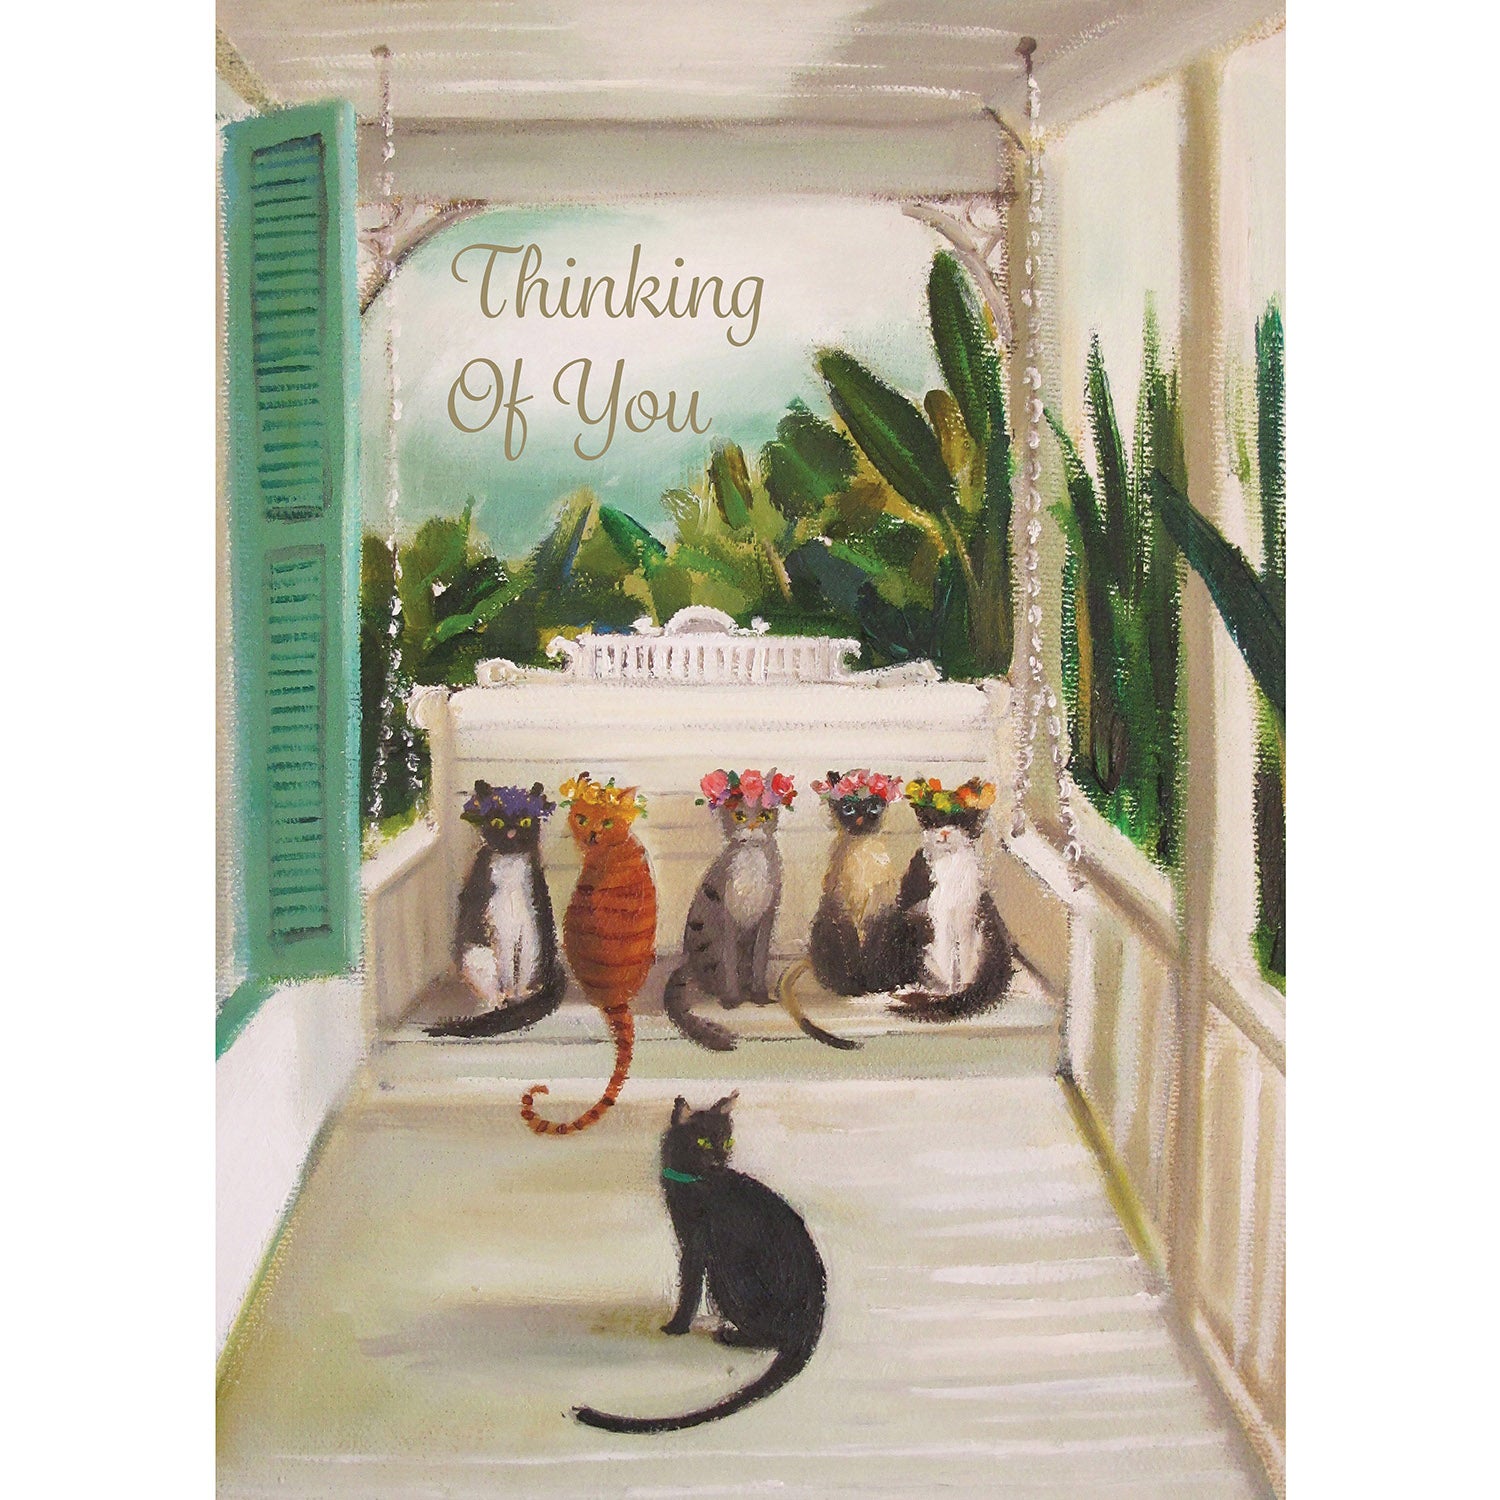 A painterly illustration of a luxurious front porch with a white porch swing bench; sitting on the bench is a group of five variously colored cats in flower crowns, and on the porch below them is a single black cat with a green collar. The message &quot;Thinking Of You&quot; is printed in gold script above the scene. 